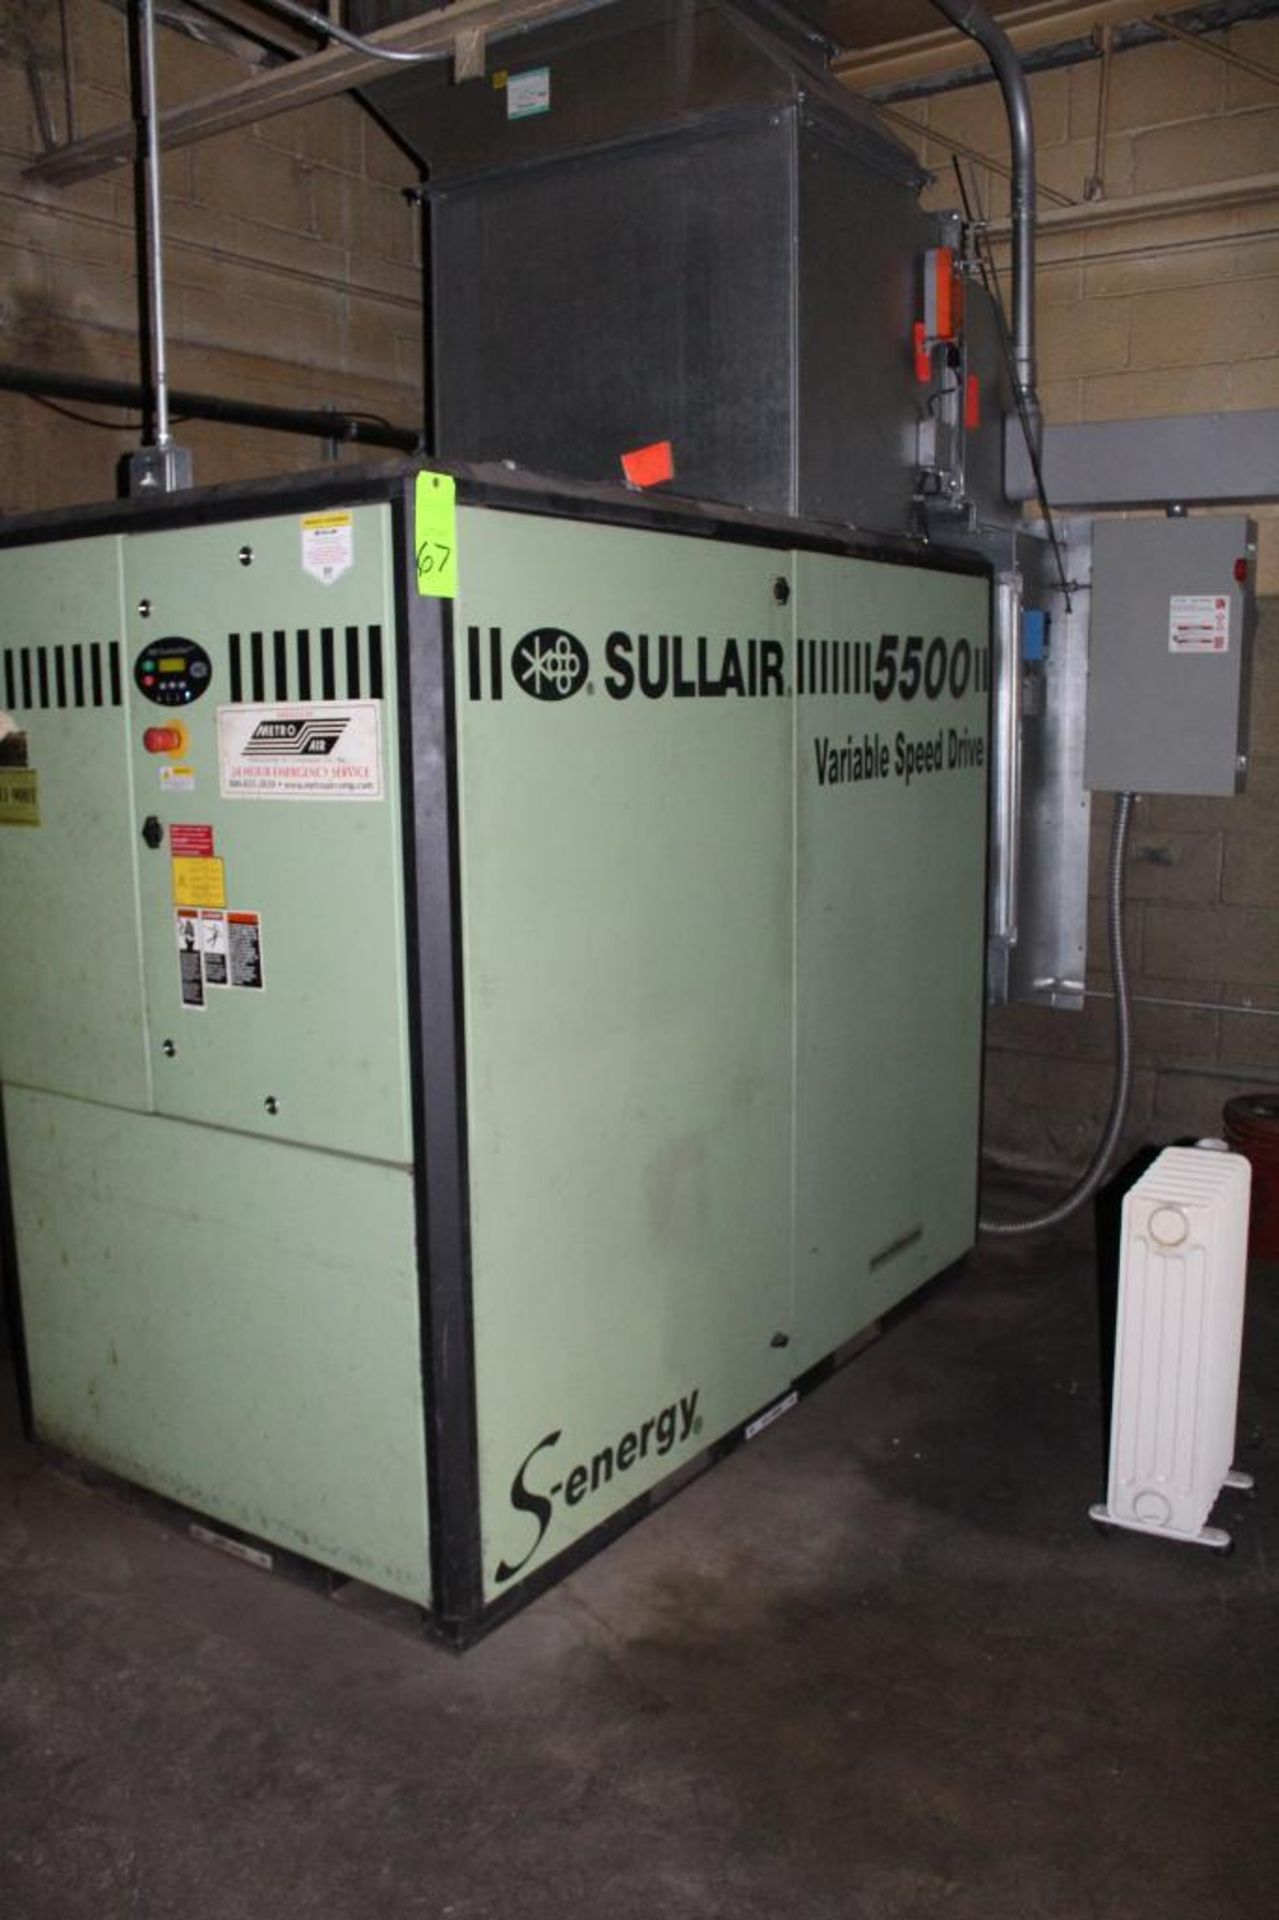 Sullair Model 5500 II Variable Speed Rotary Screw Air Compressor - Image 2 of 2